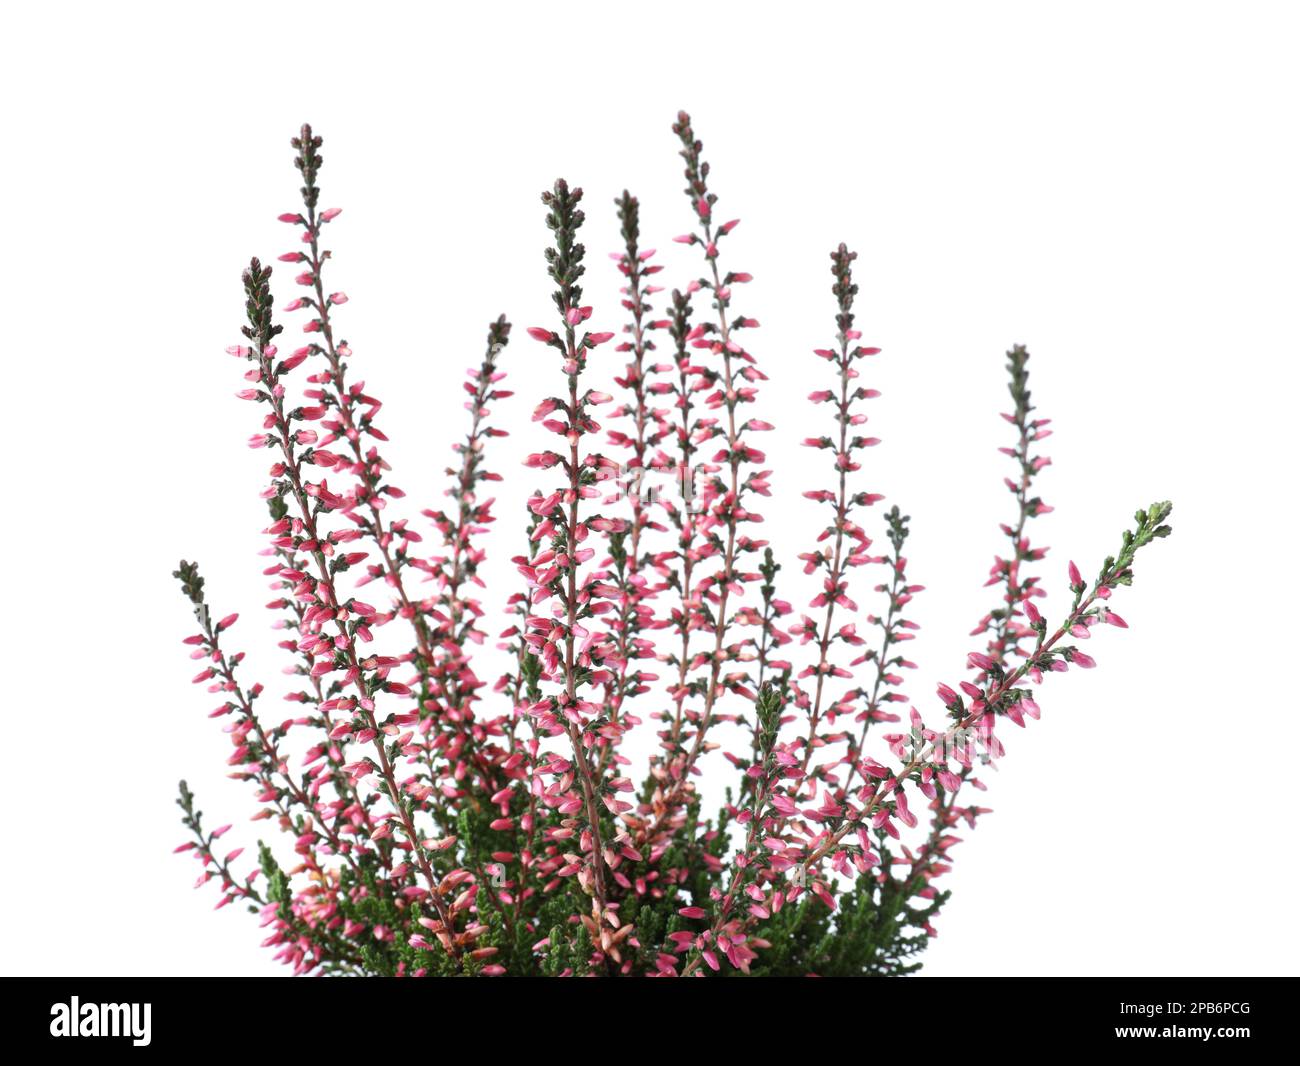 Heather with beautiful flowers on white background Stock Photo